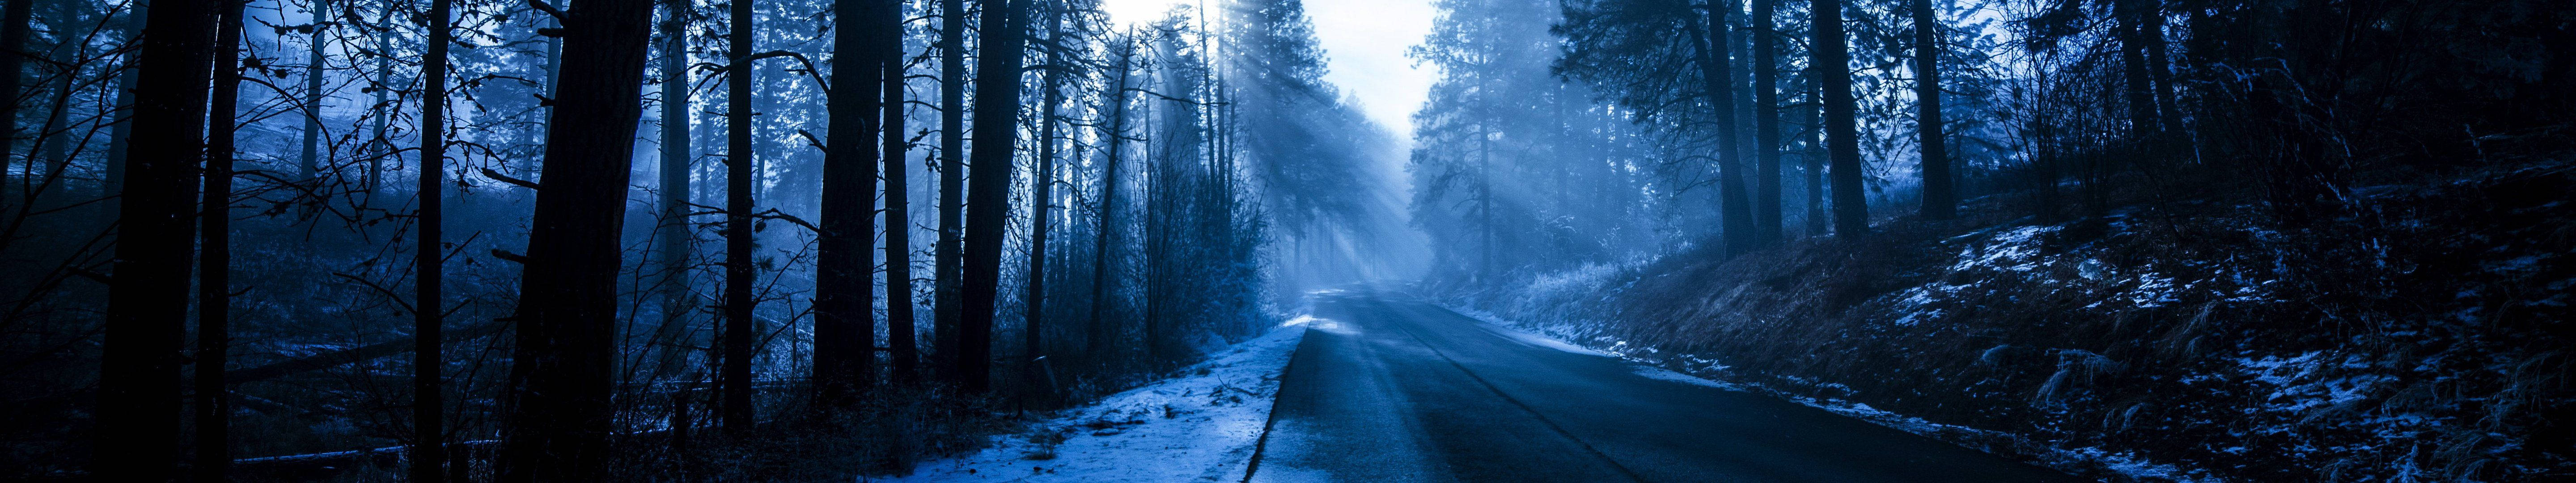 Blue Aesthetic Forest Road